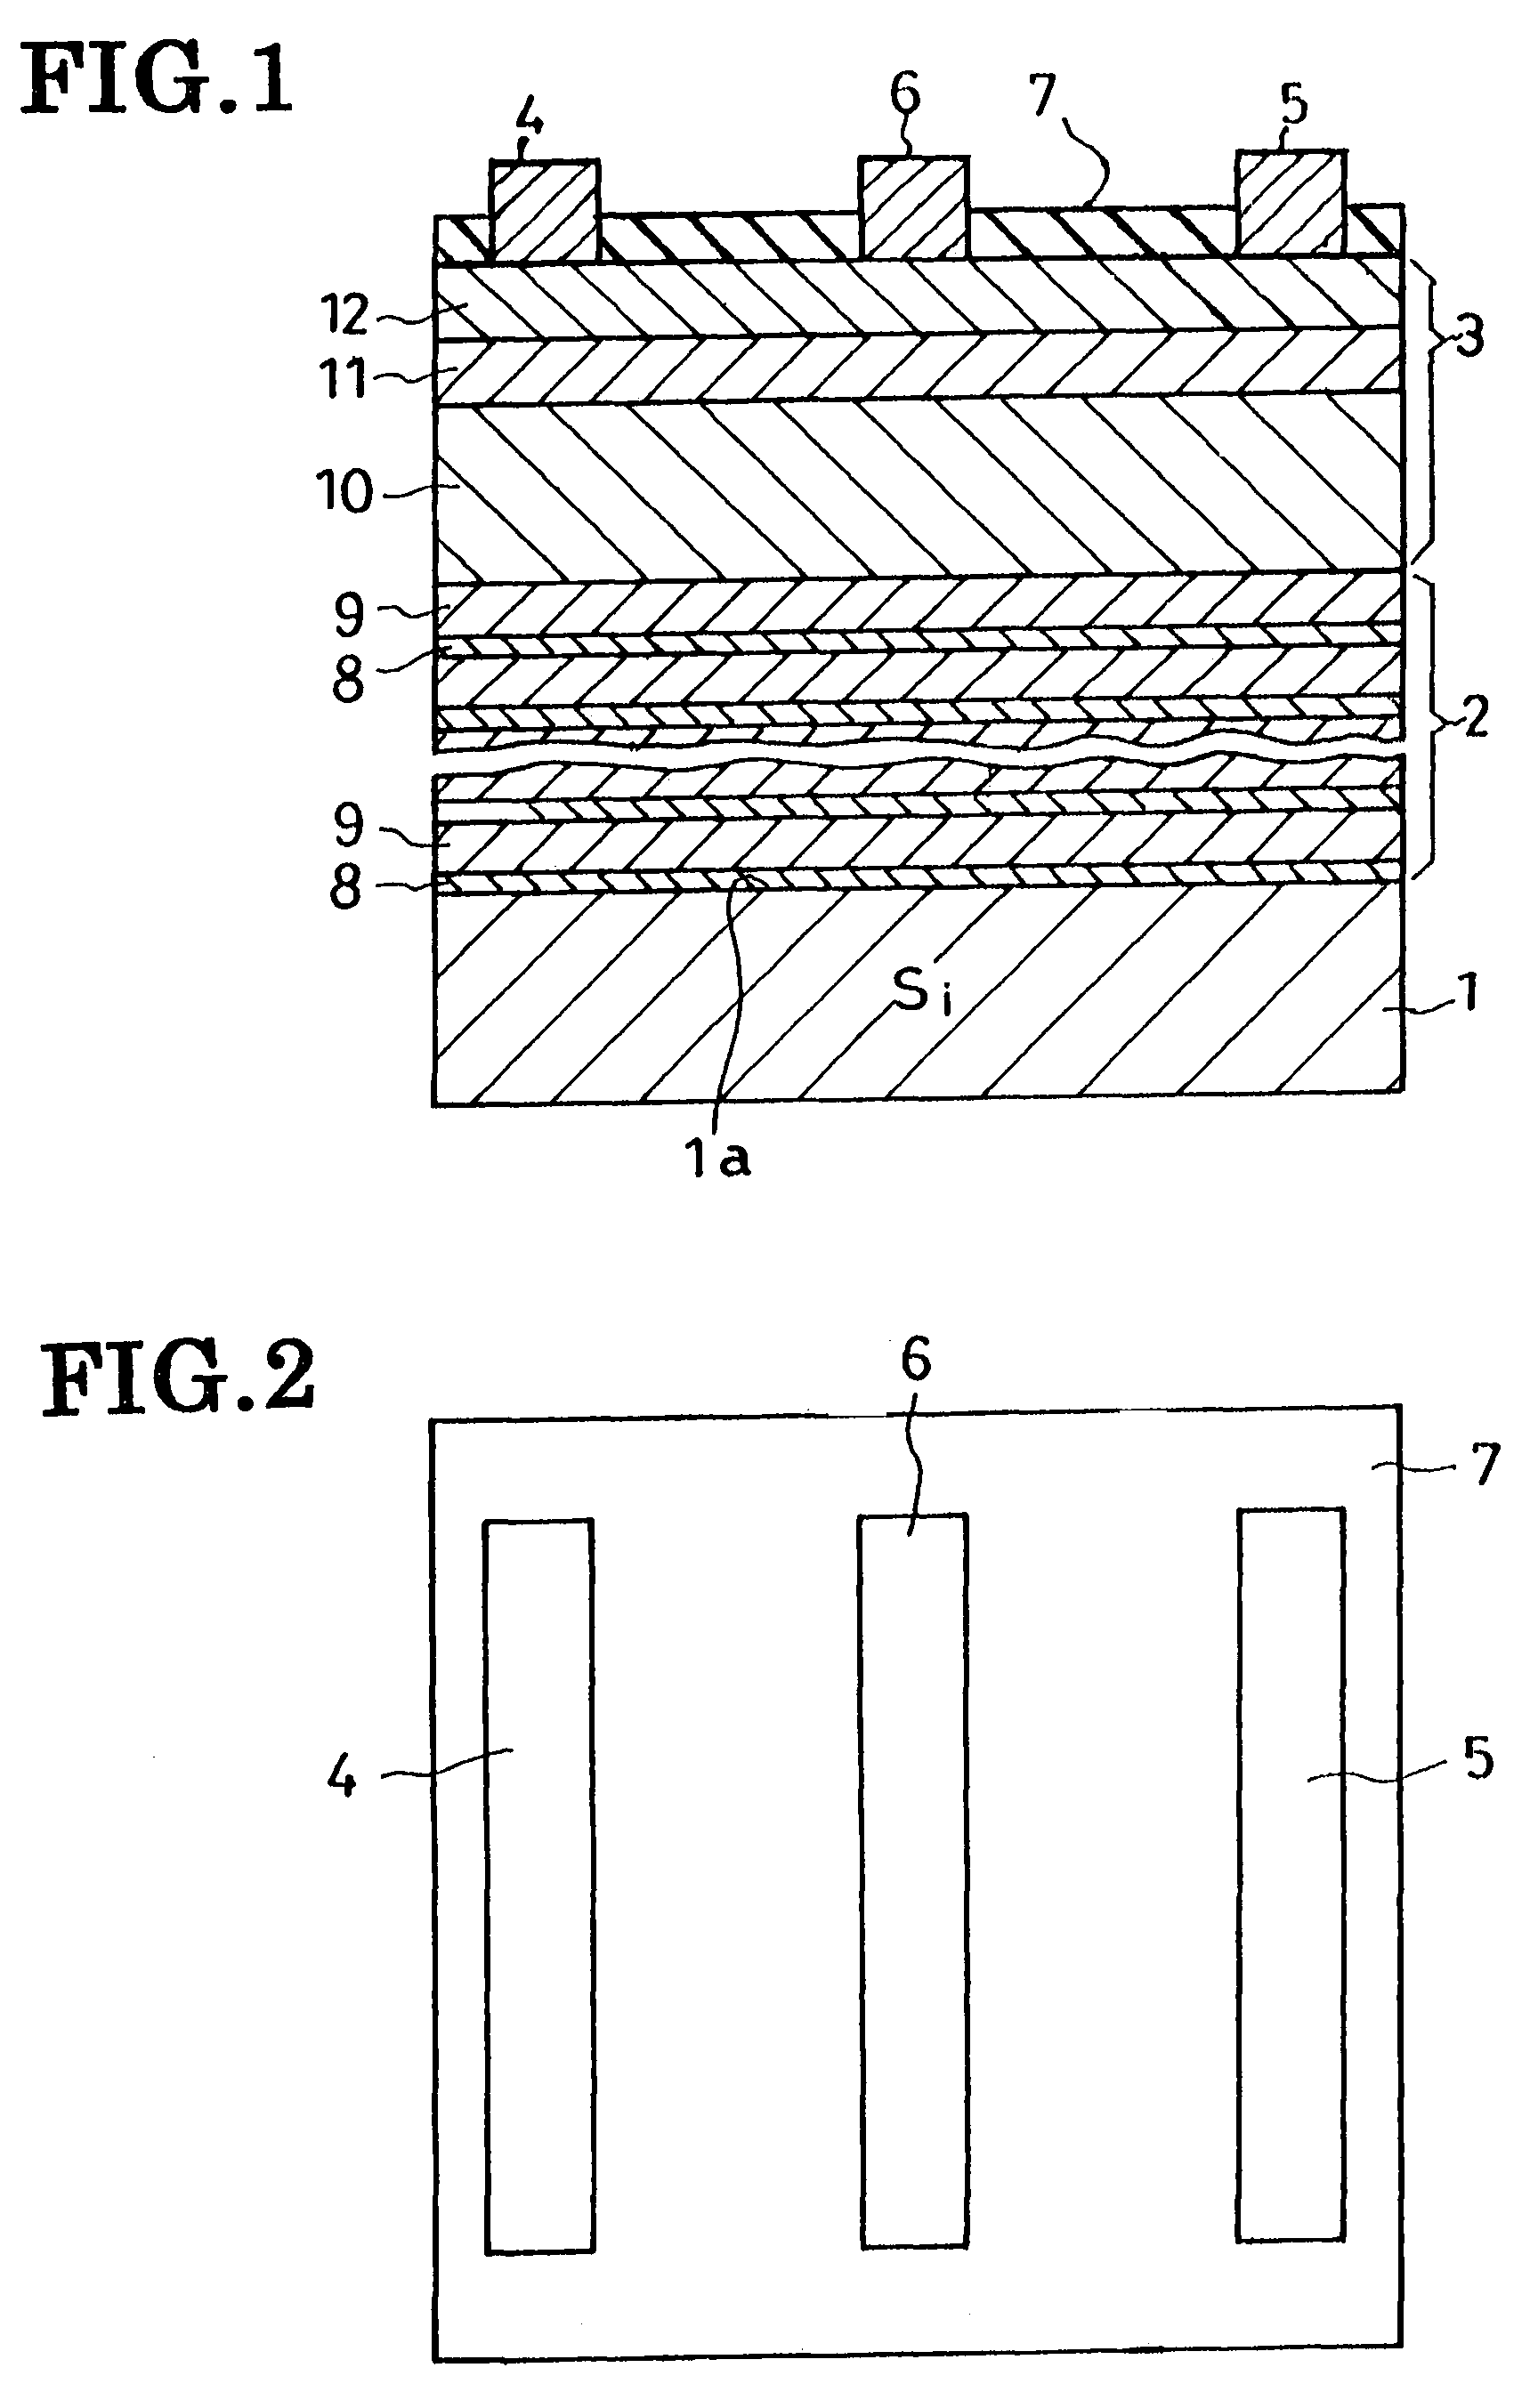 Nitride-based semiconductor device with reduced leakage current